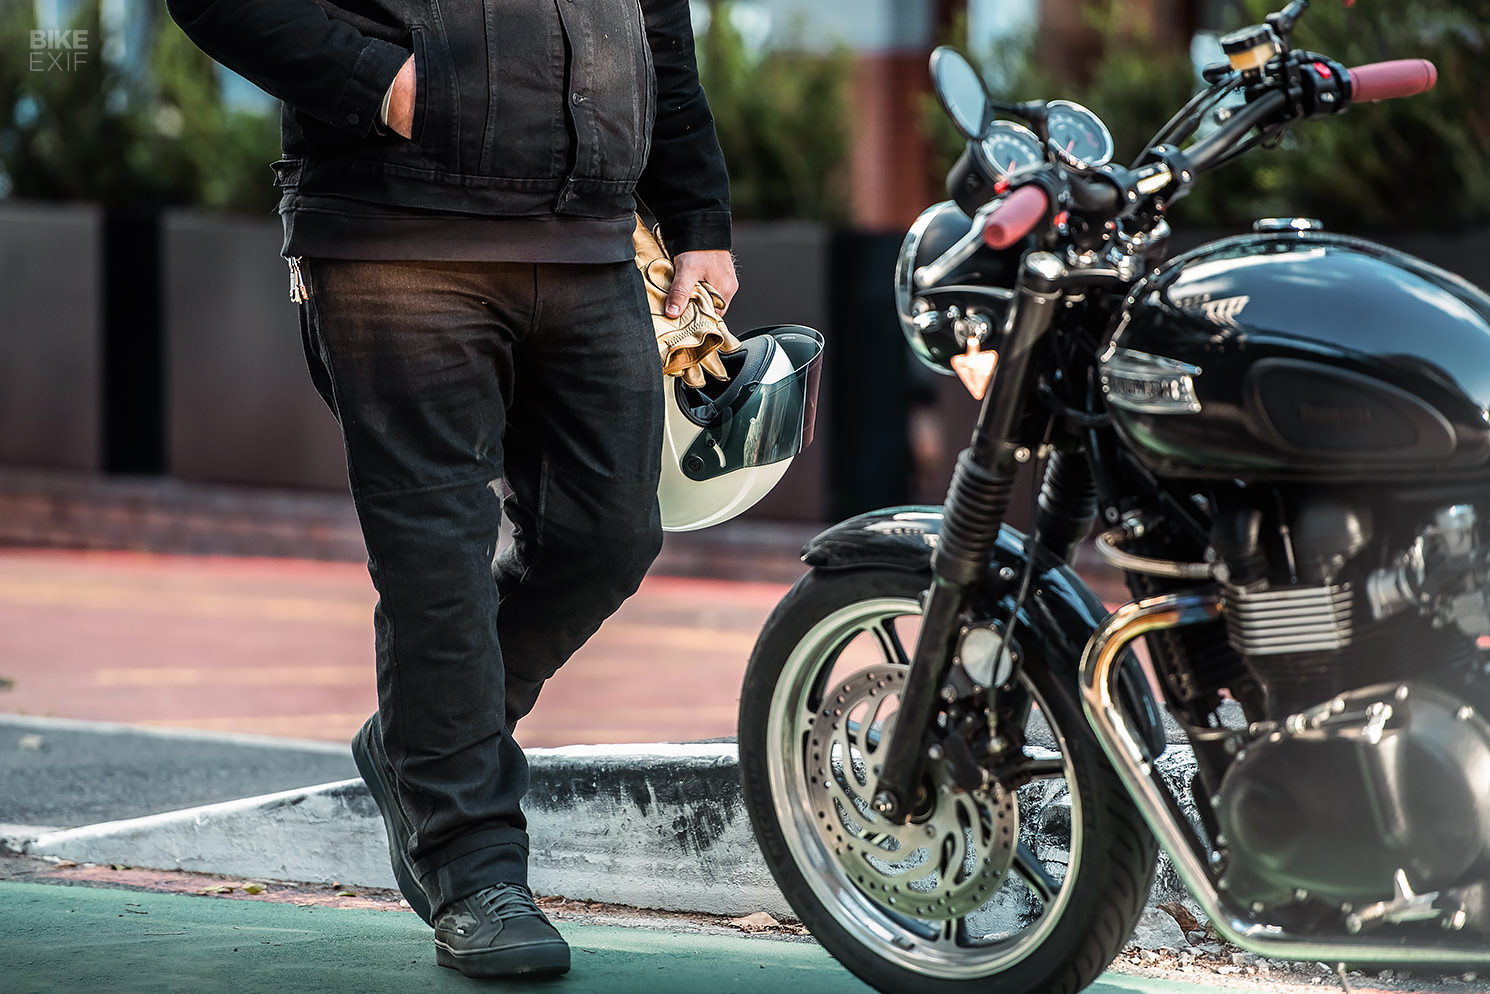 Road Tested: The new Saint Engineered armored motorbike denims